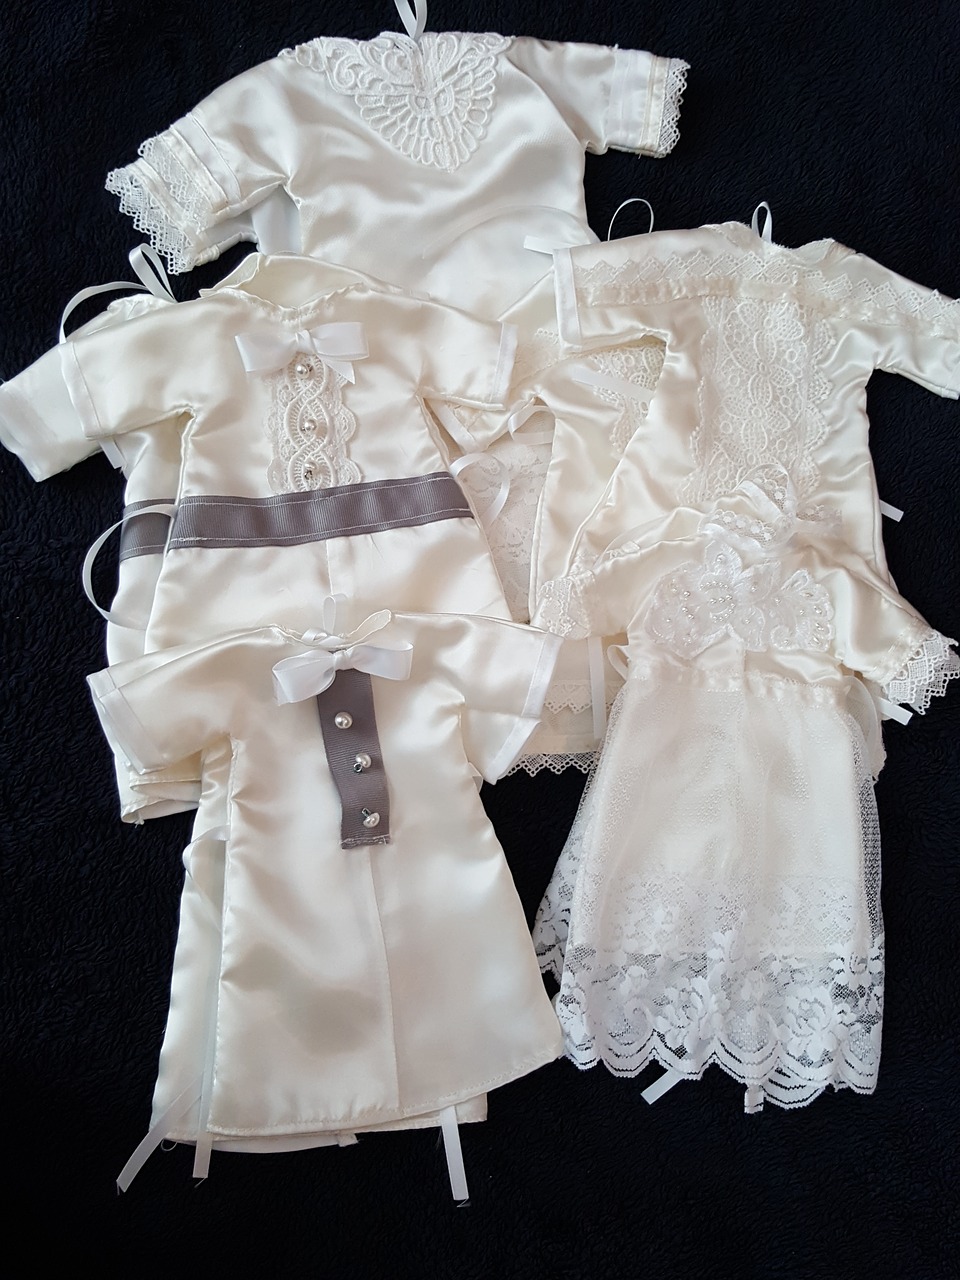 angel gowns baby gowns bereavement clothing free photo